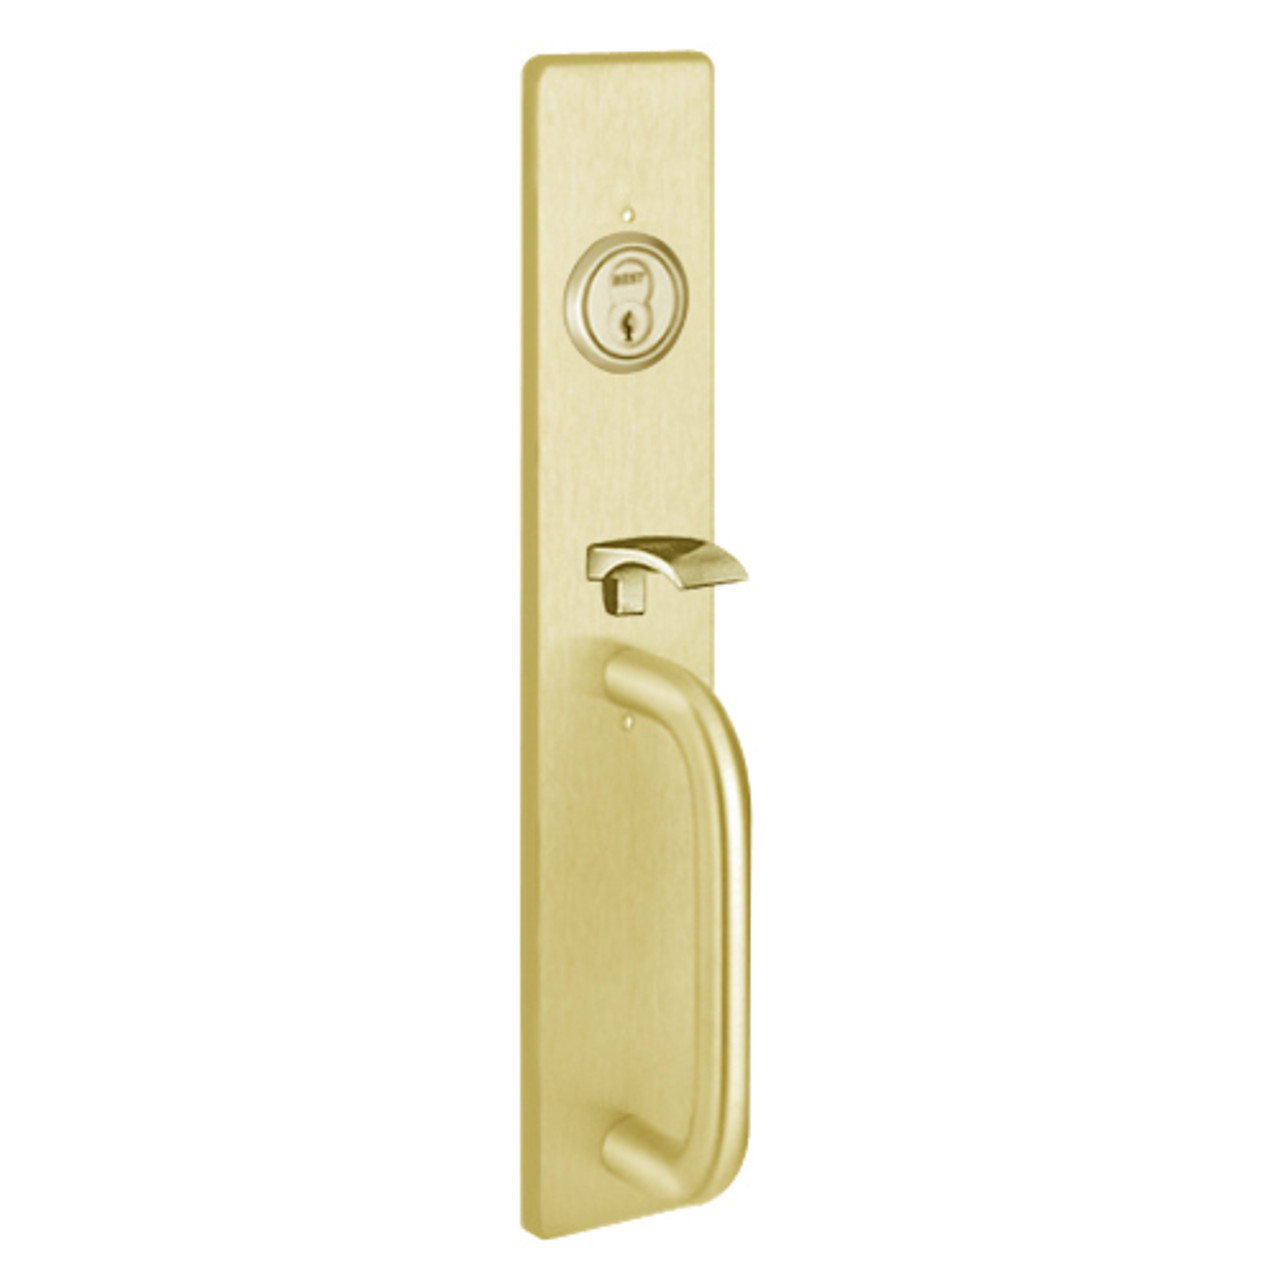 1705C-605 PHI Key Controls Thumb Piece Trim with C Design Pull for Apex and Olympian Series Exit Device in Bright Brass Finish